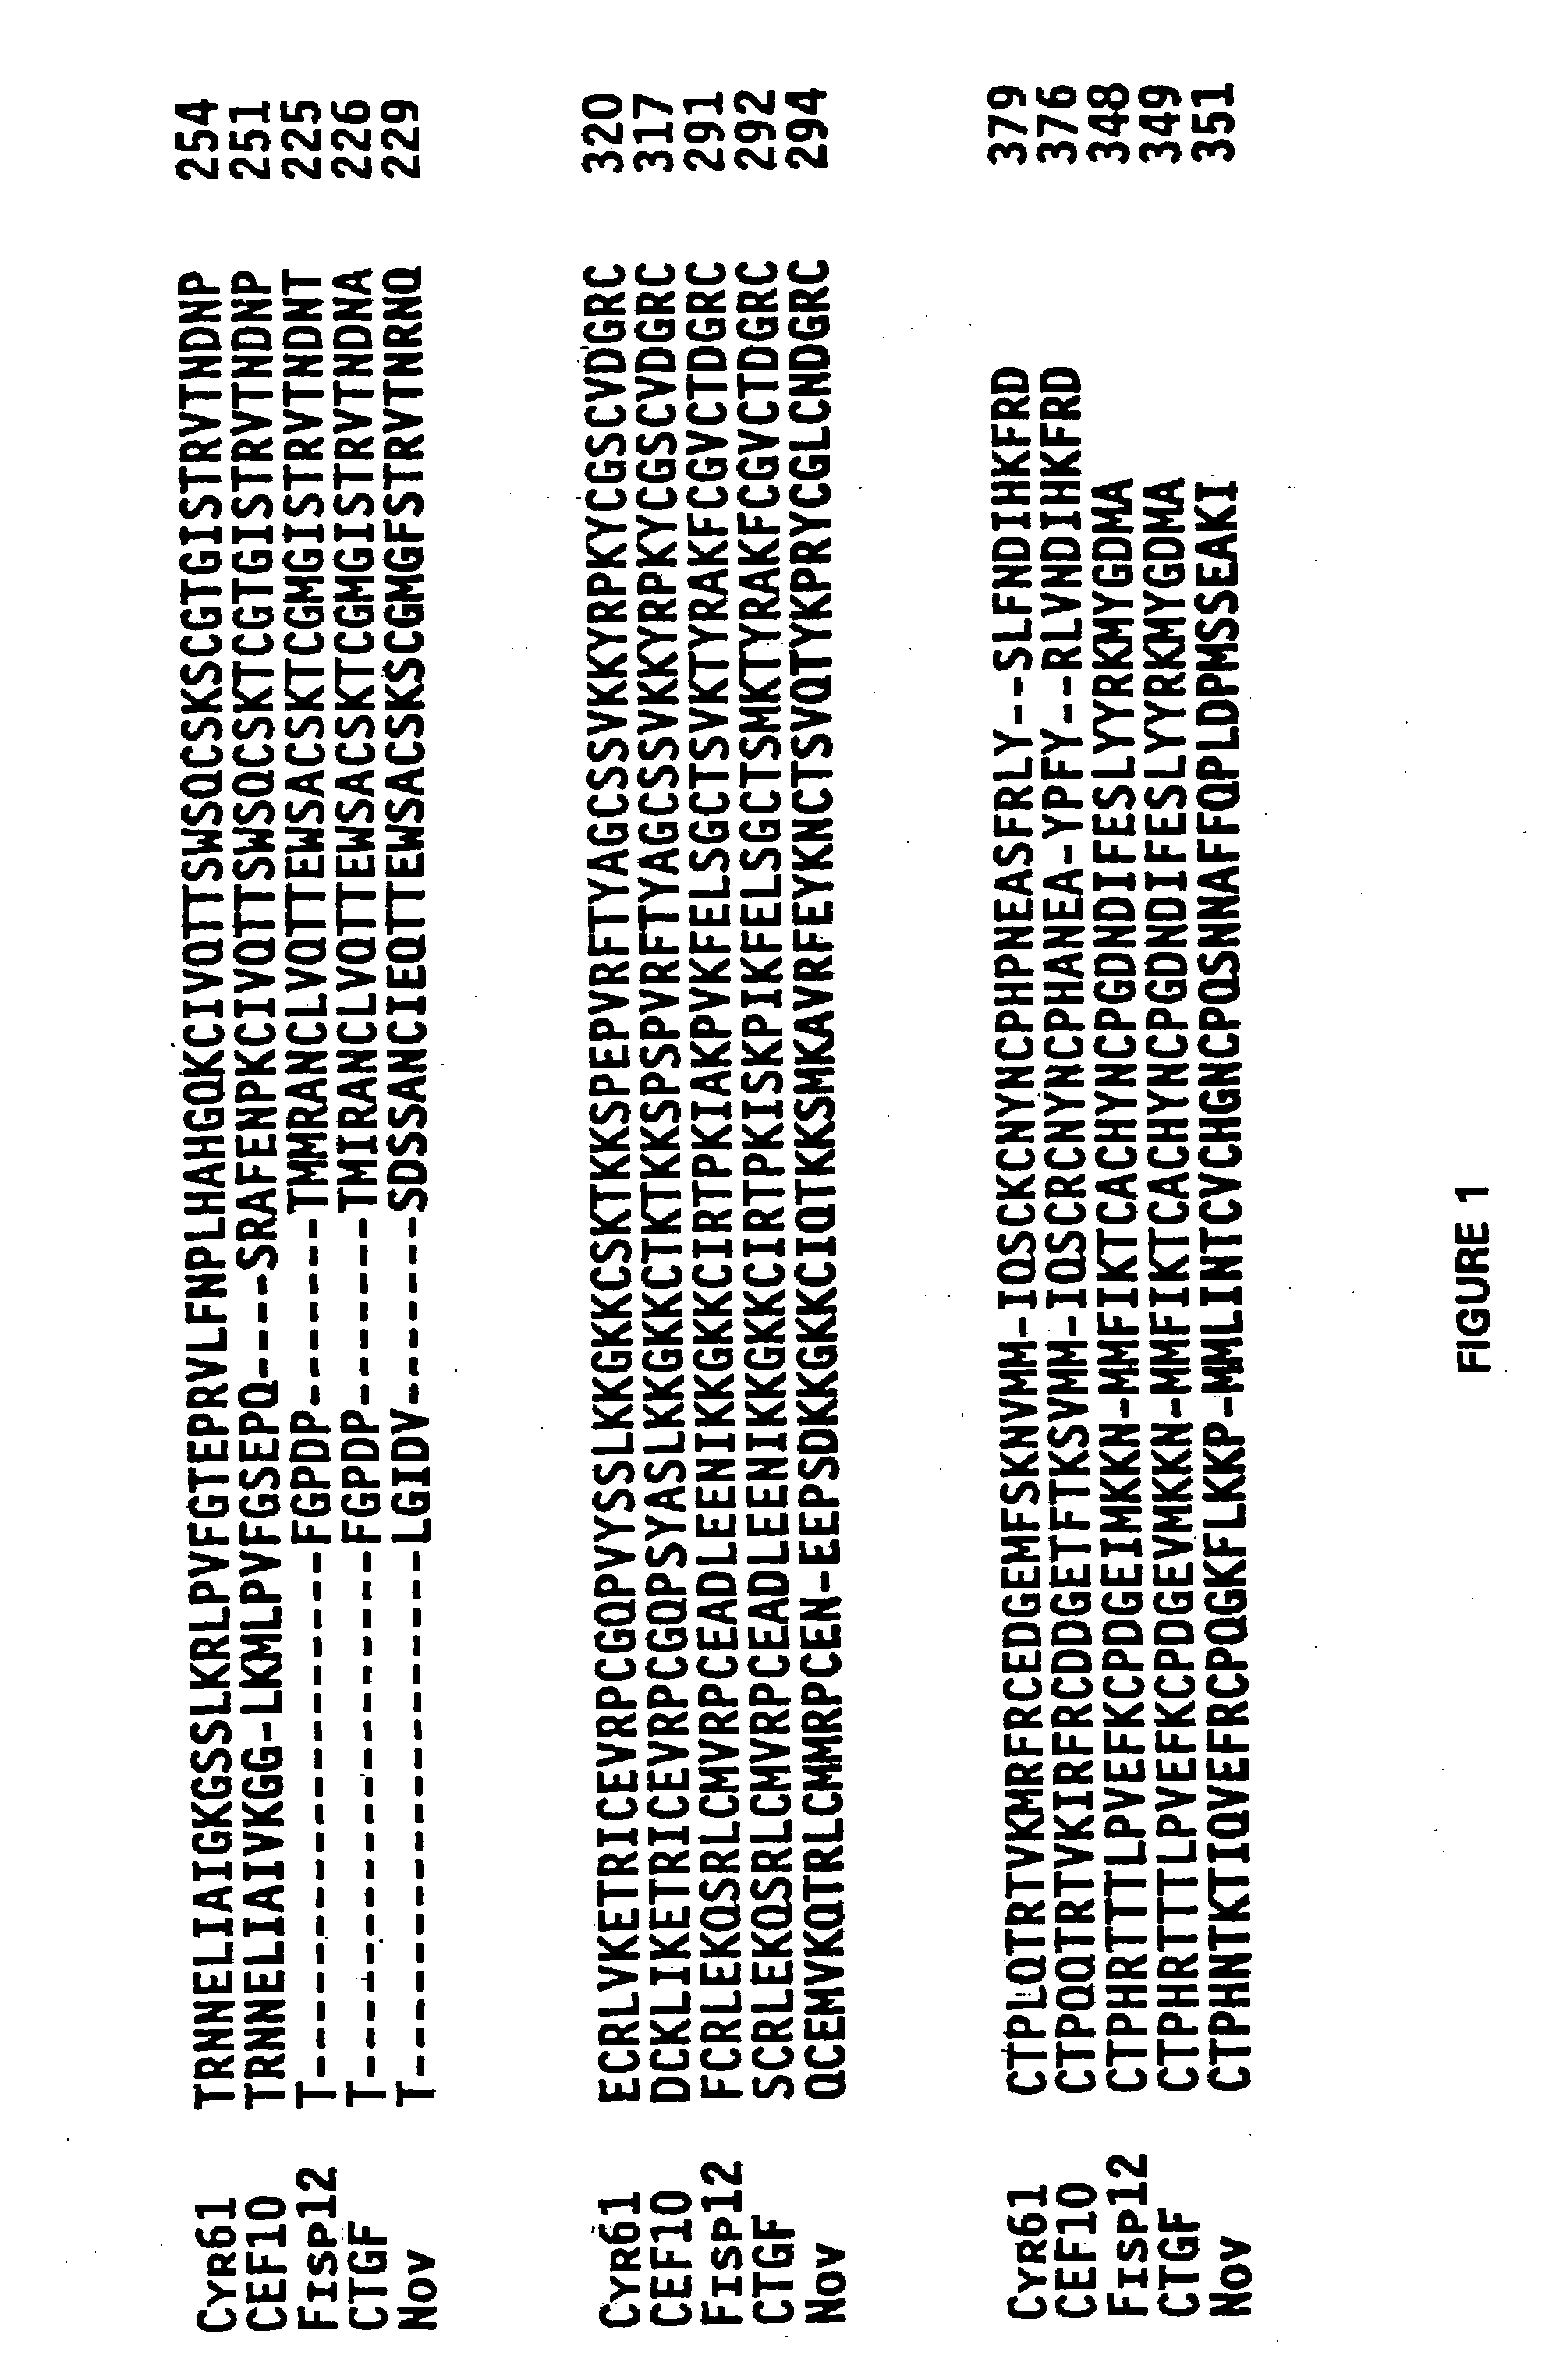 Cyr61 compositions and methods